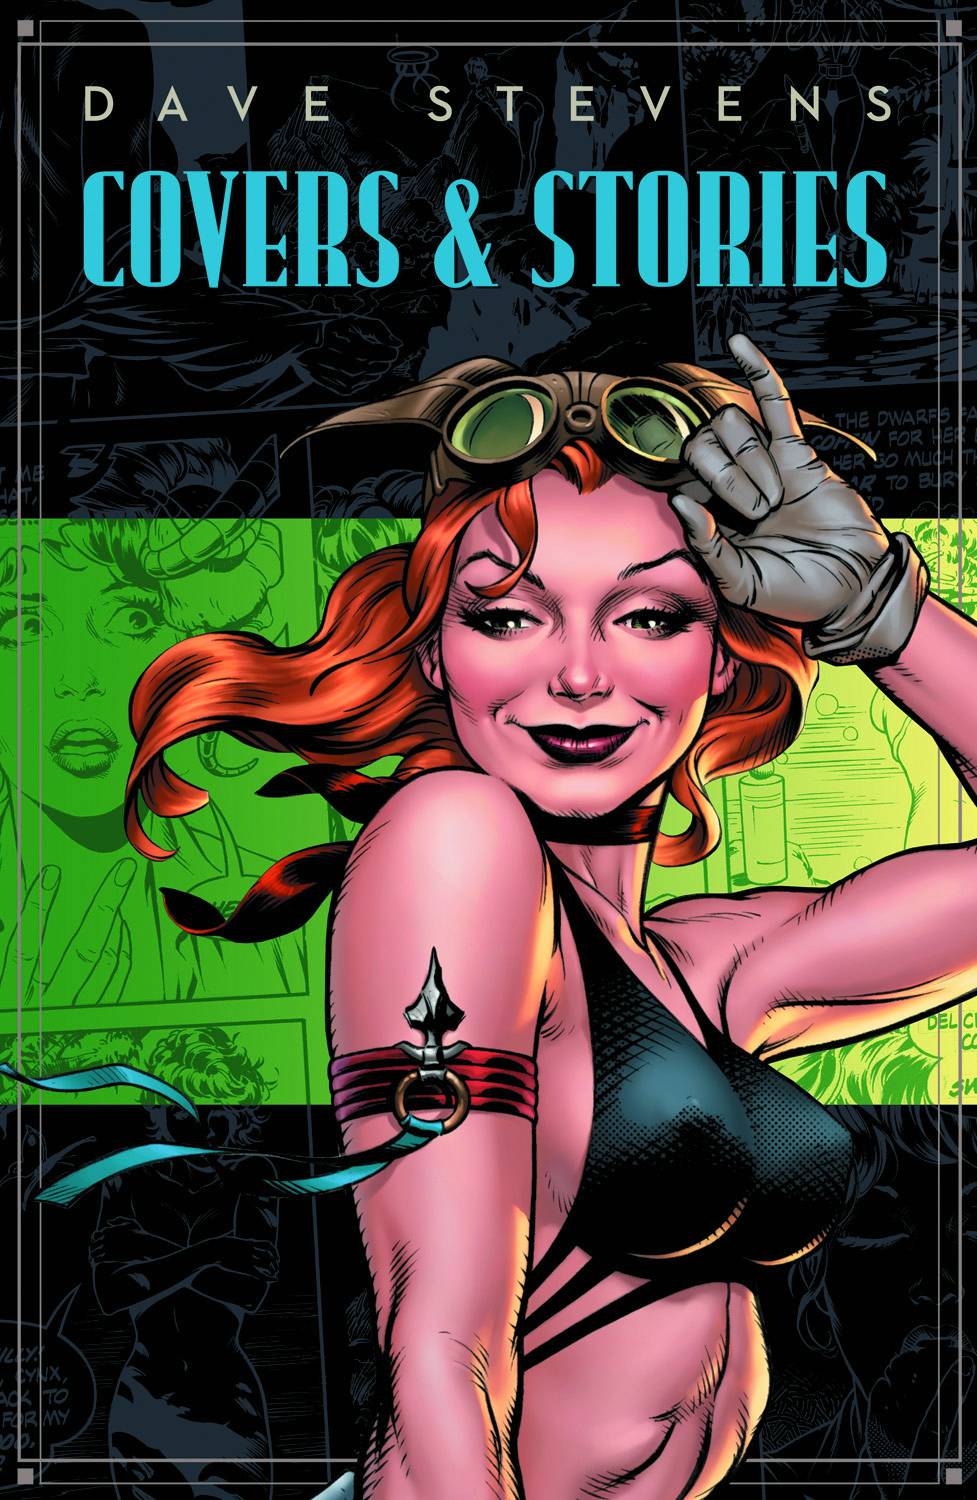 Dave Stevens Stories & Covers Hardcover